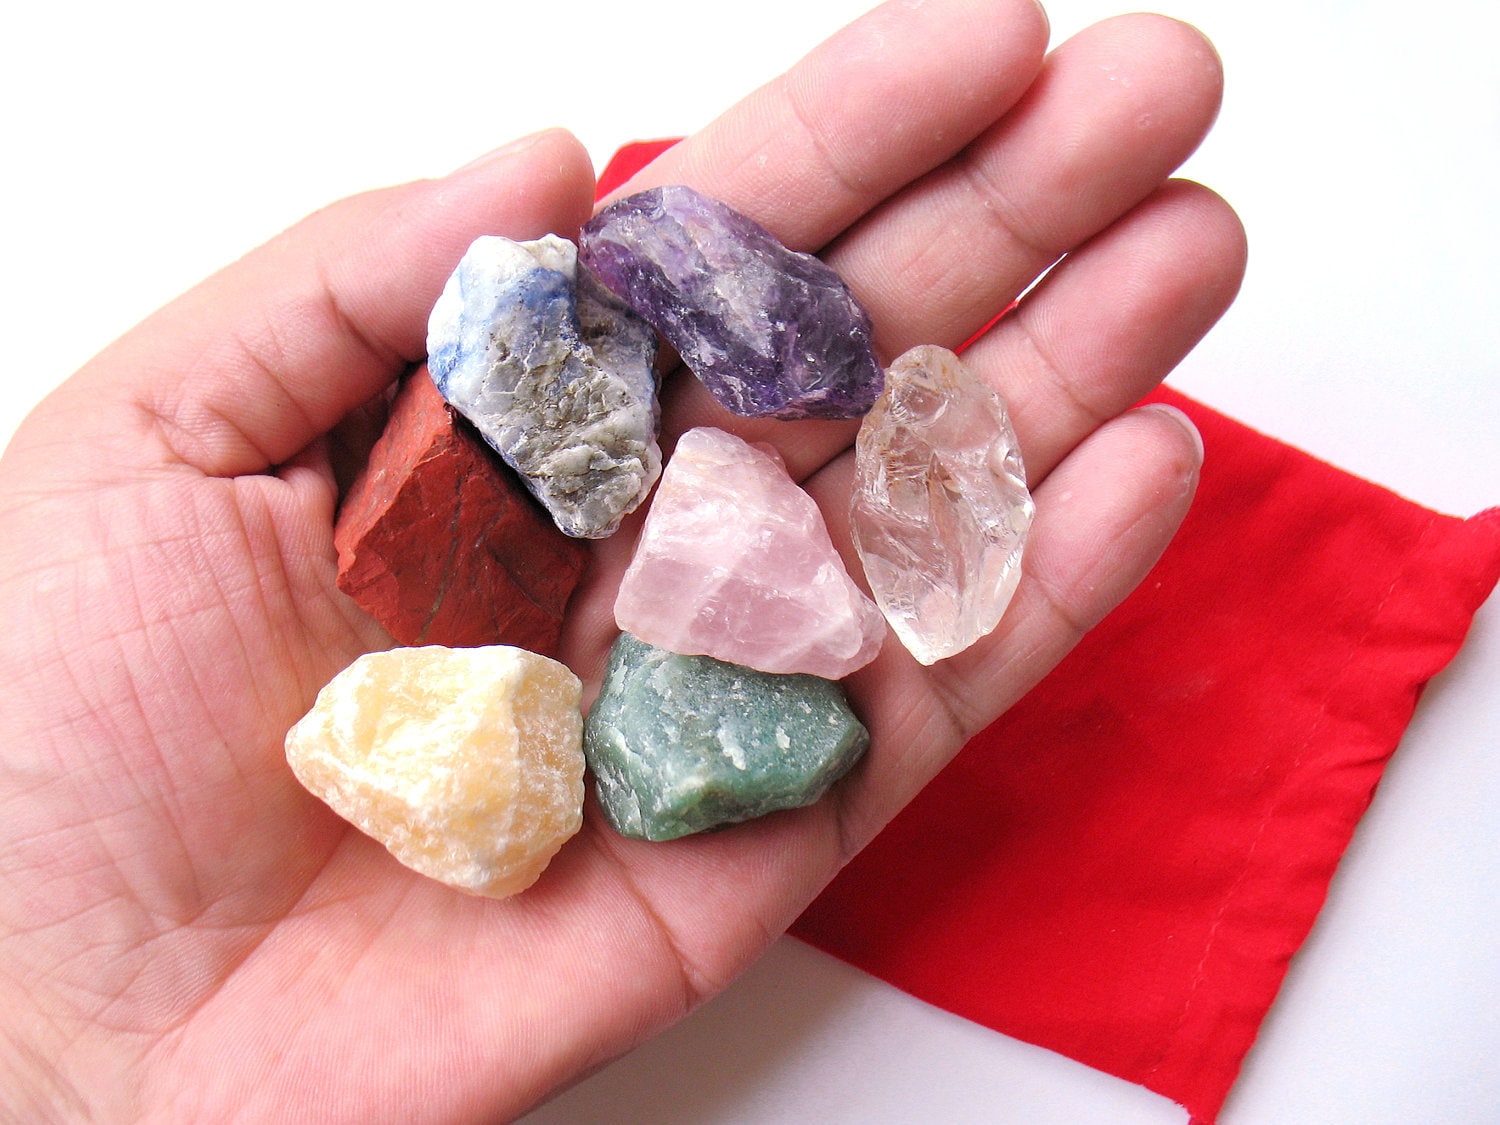 Up To 77% Off on 14 Pcs Set Chakra Crystals an